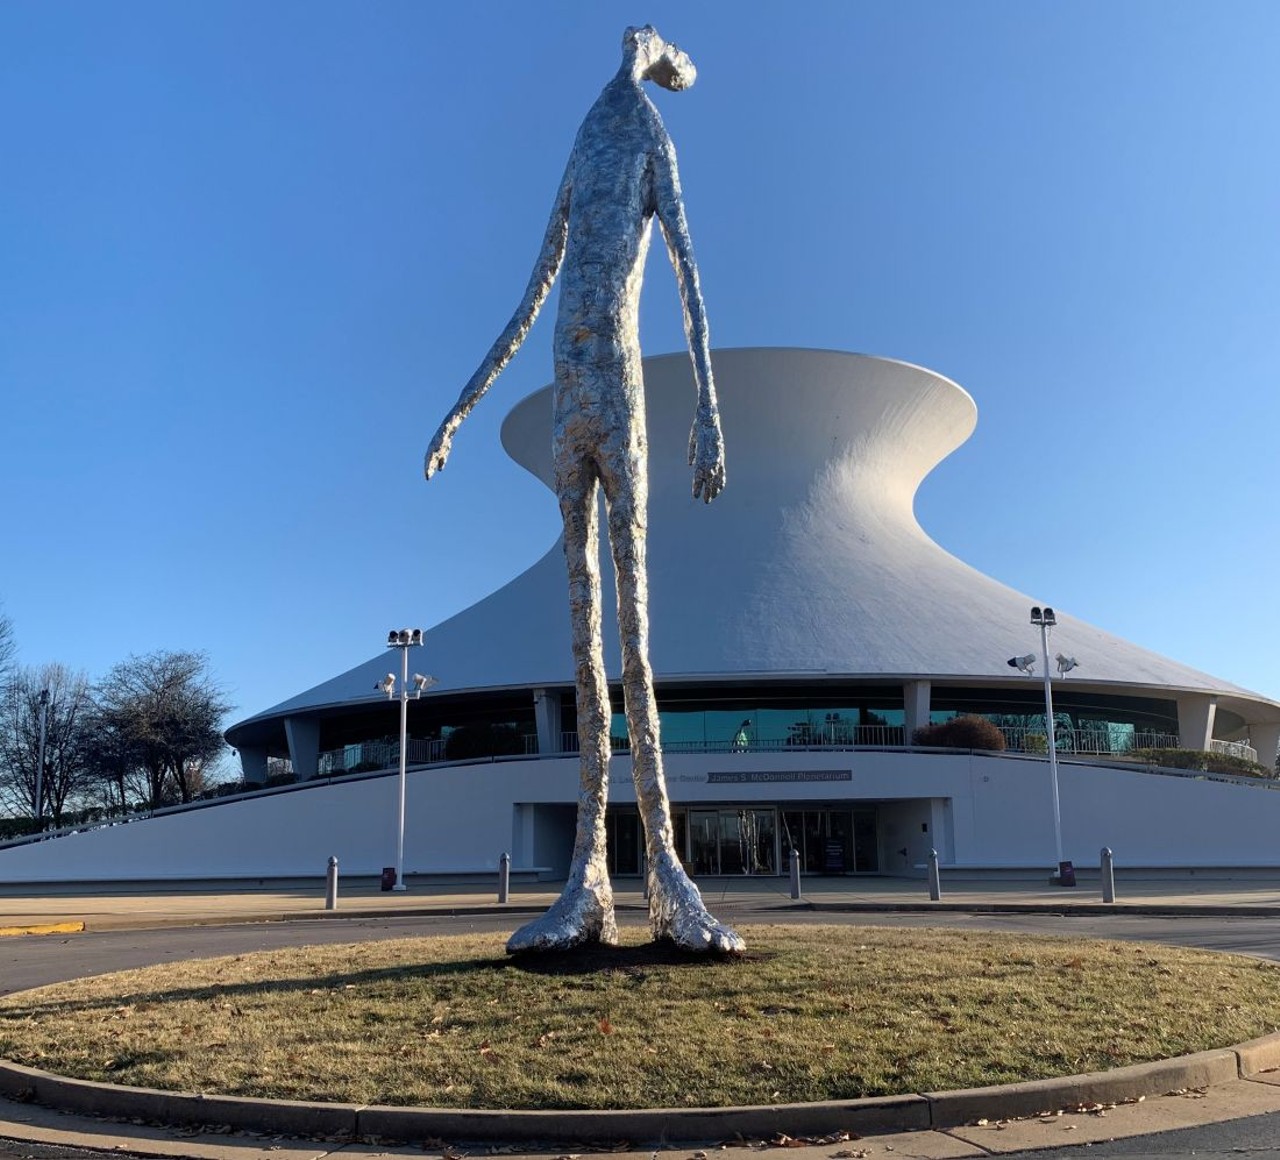 "Looking Up&#148;
James S. McDonnell Planetarium (5050 Oakland Avenue)
This monument is 33-feet tall and made out of stainless steel. Created by artist Tom Friedman. 
Photo credit: Riverfront Times / @riverfronttimes on Instagram